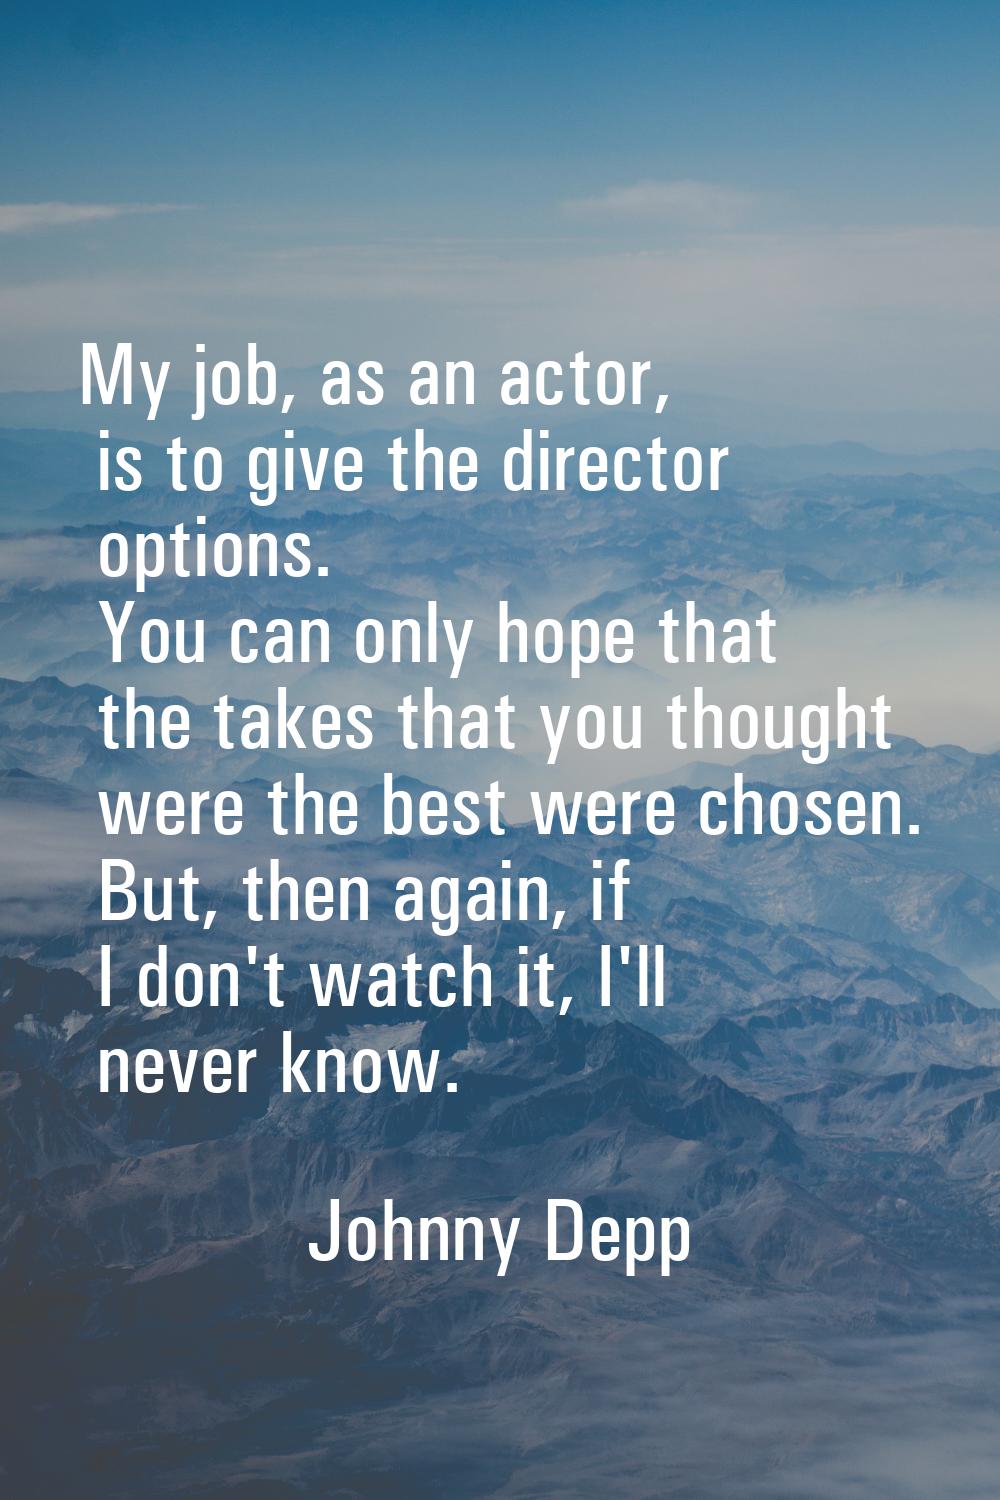 My job, as an actor, is to give the director options. You can only hope that the takes that you tho